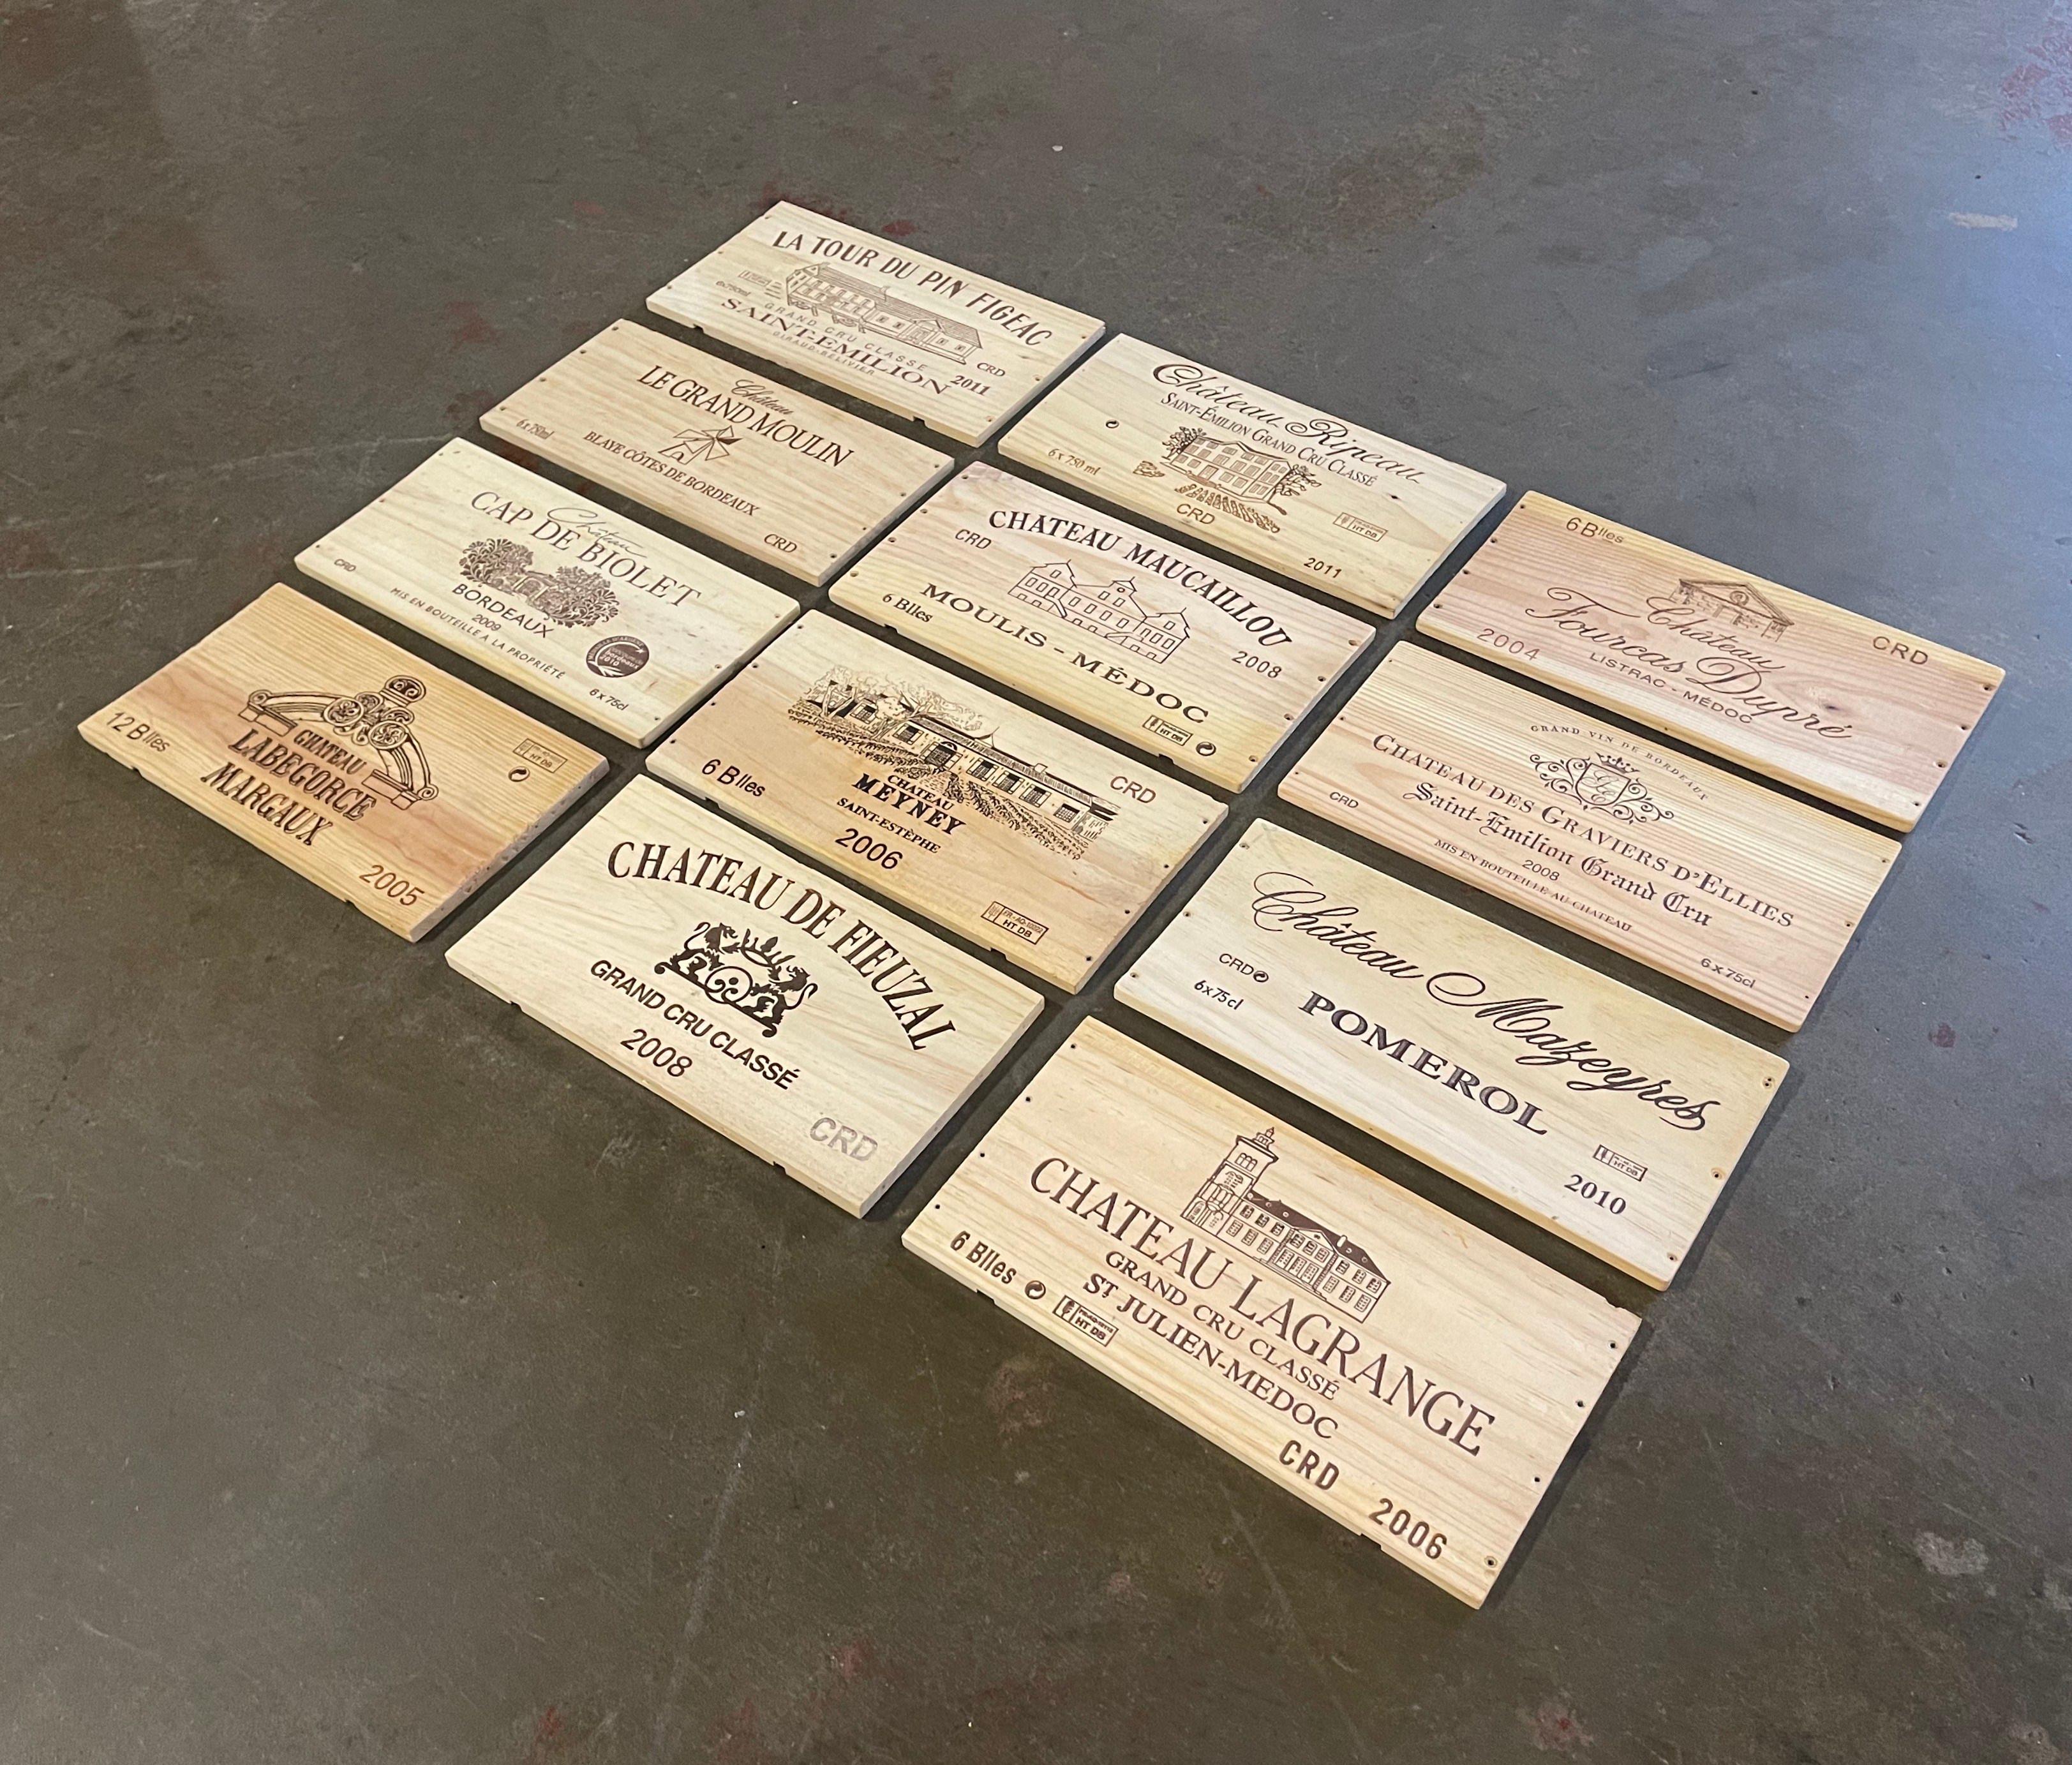 Decorate a wine cellar wall with this set of French wine labels. Crafted in France circa 2000, each wooden label features a well known French Bordeaux Chateau. The set includes 